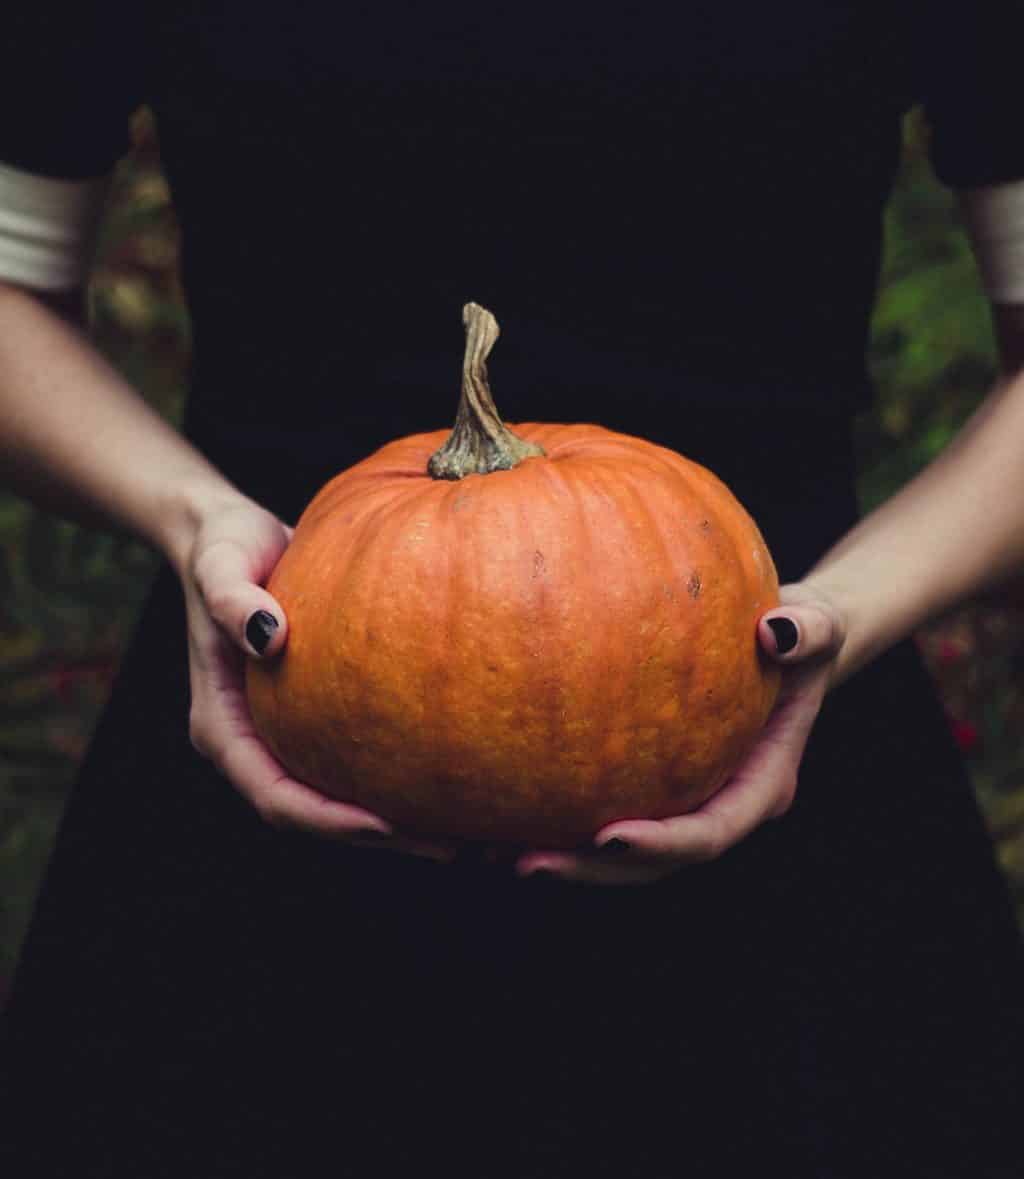 Woman with black finger nail polish and black dress cradling a an orange pumpkin with both hands in front of her picture to represent 2020 Hashtags 